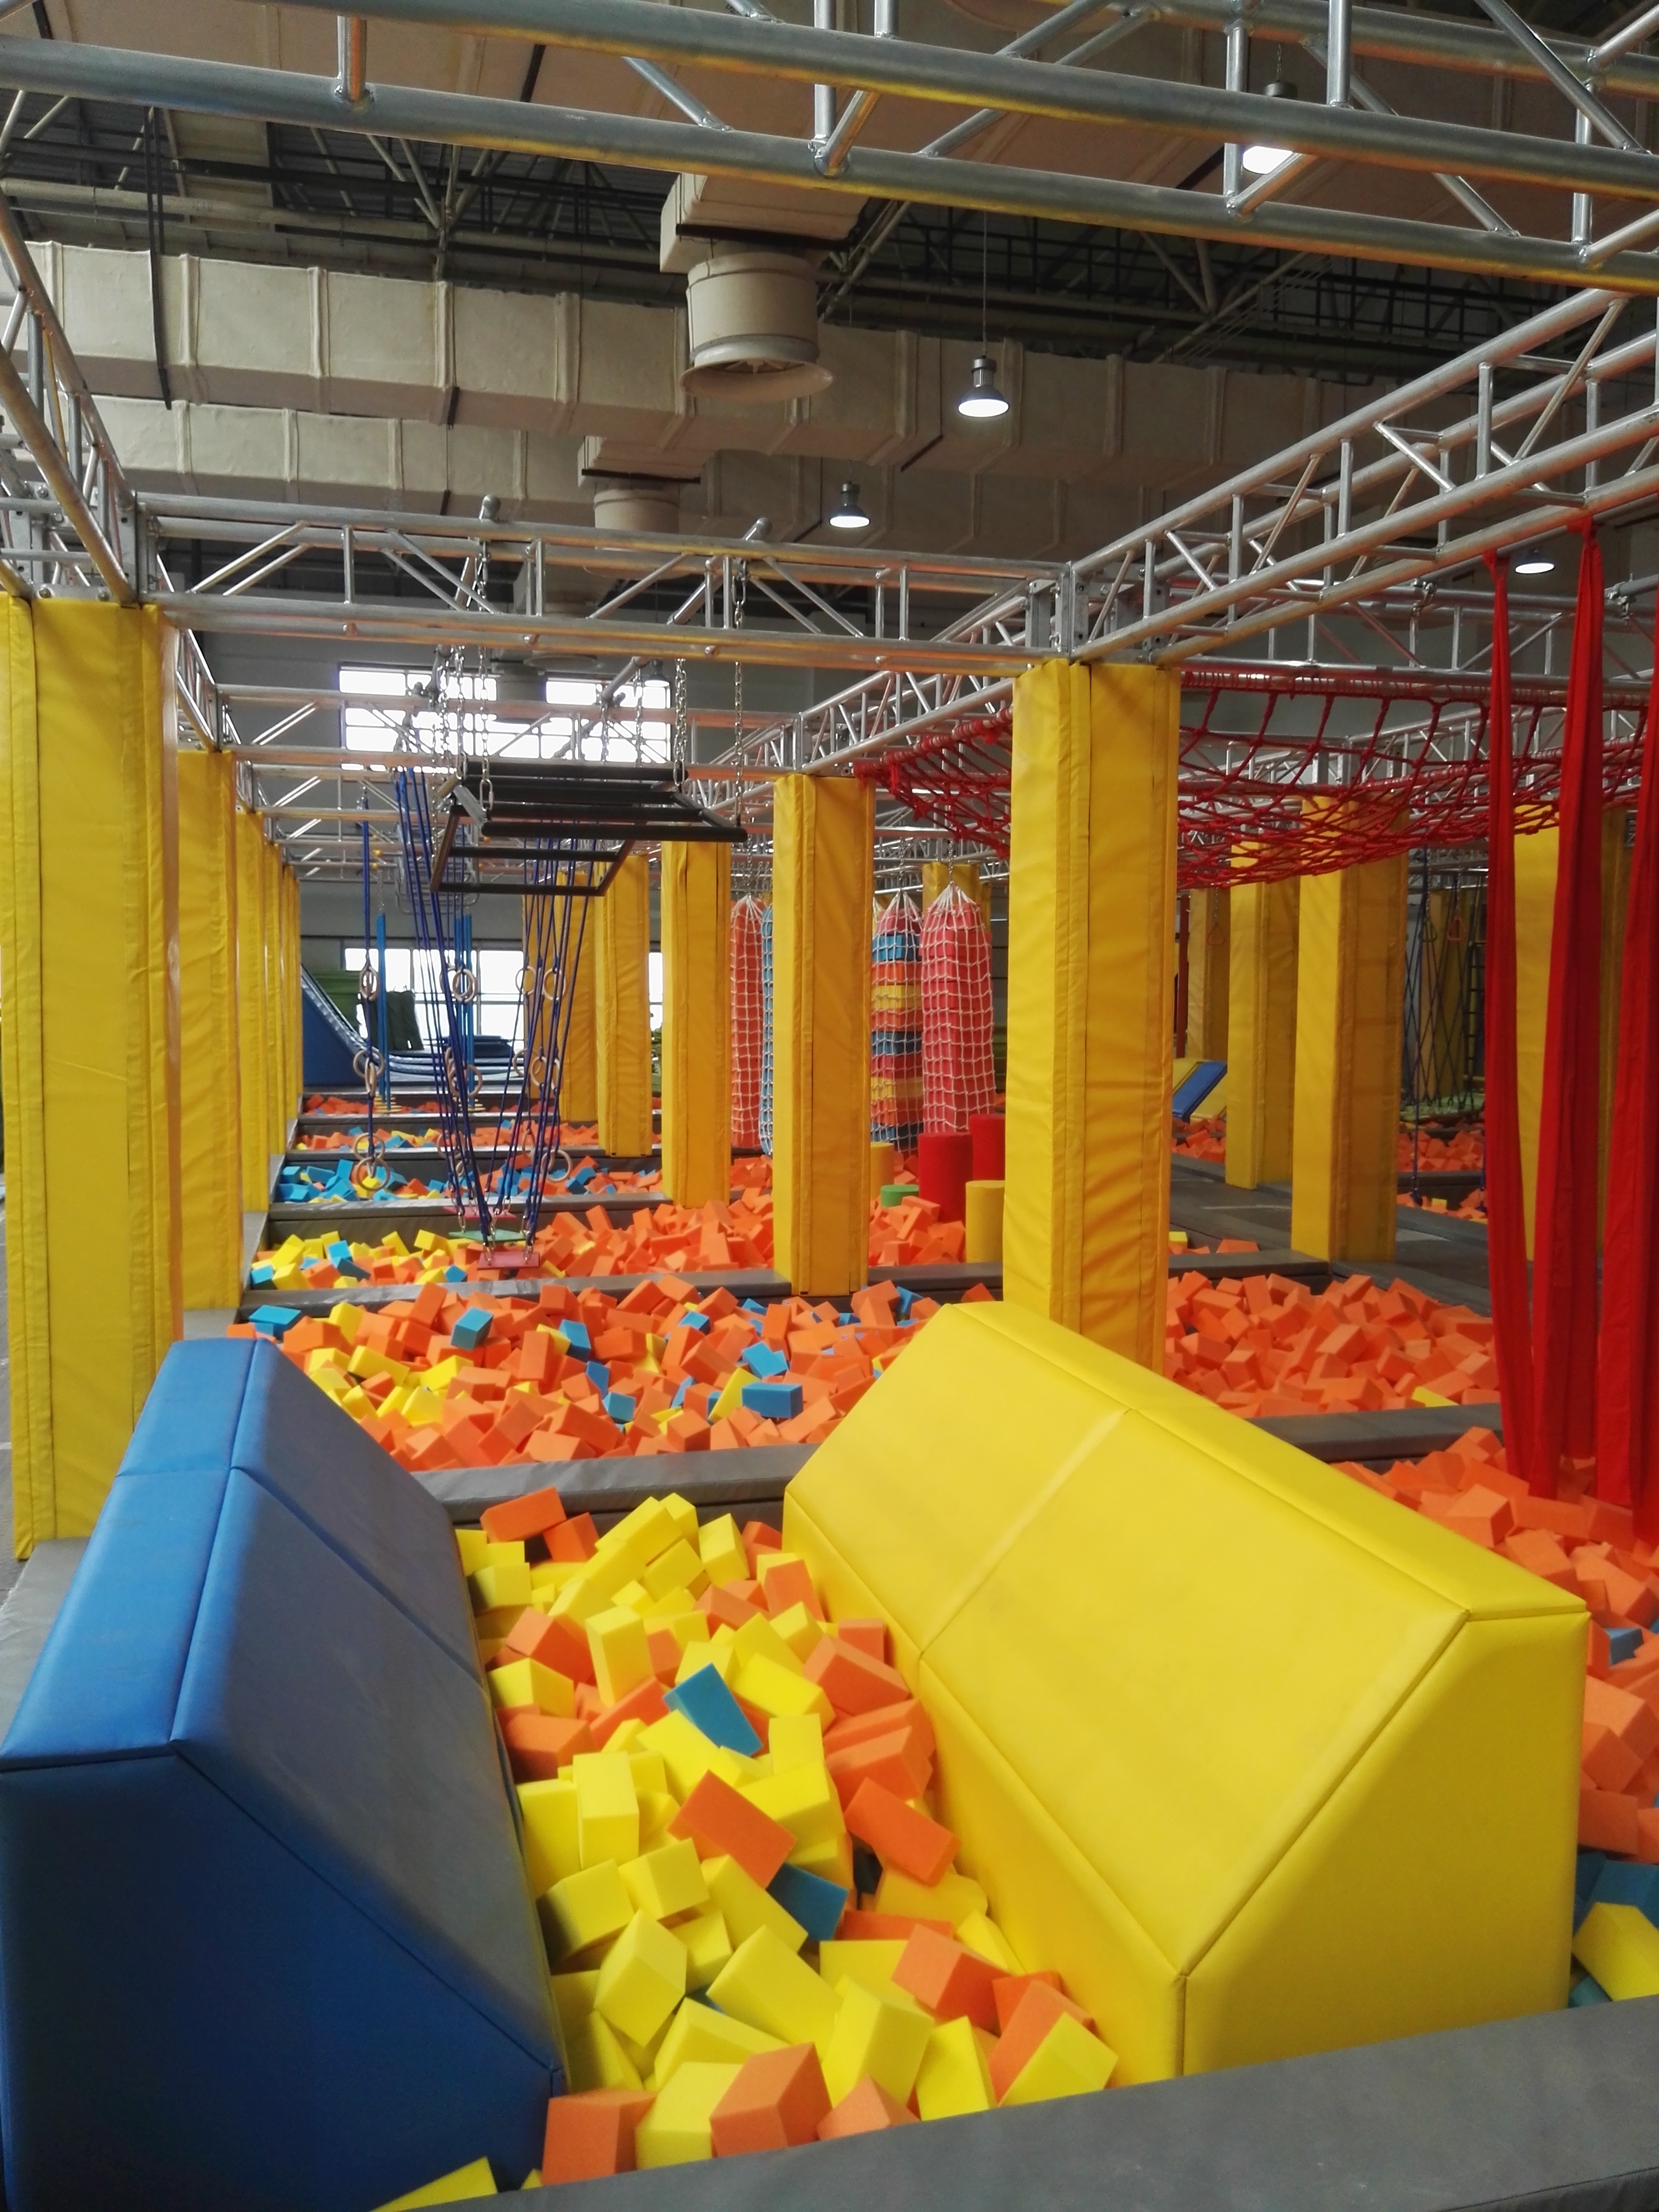 What is soft play equipment made of in an indoor playground?